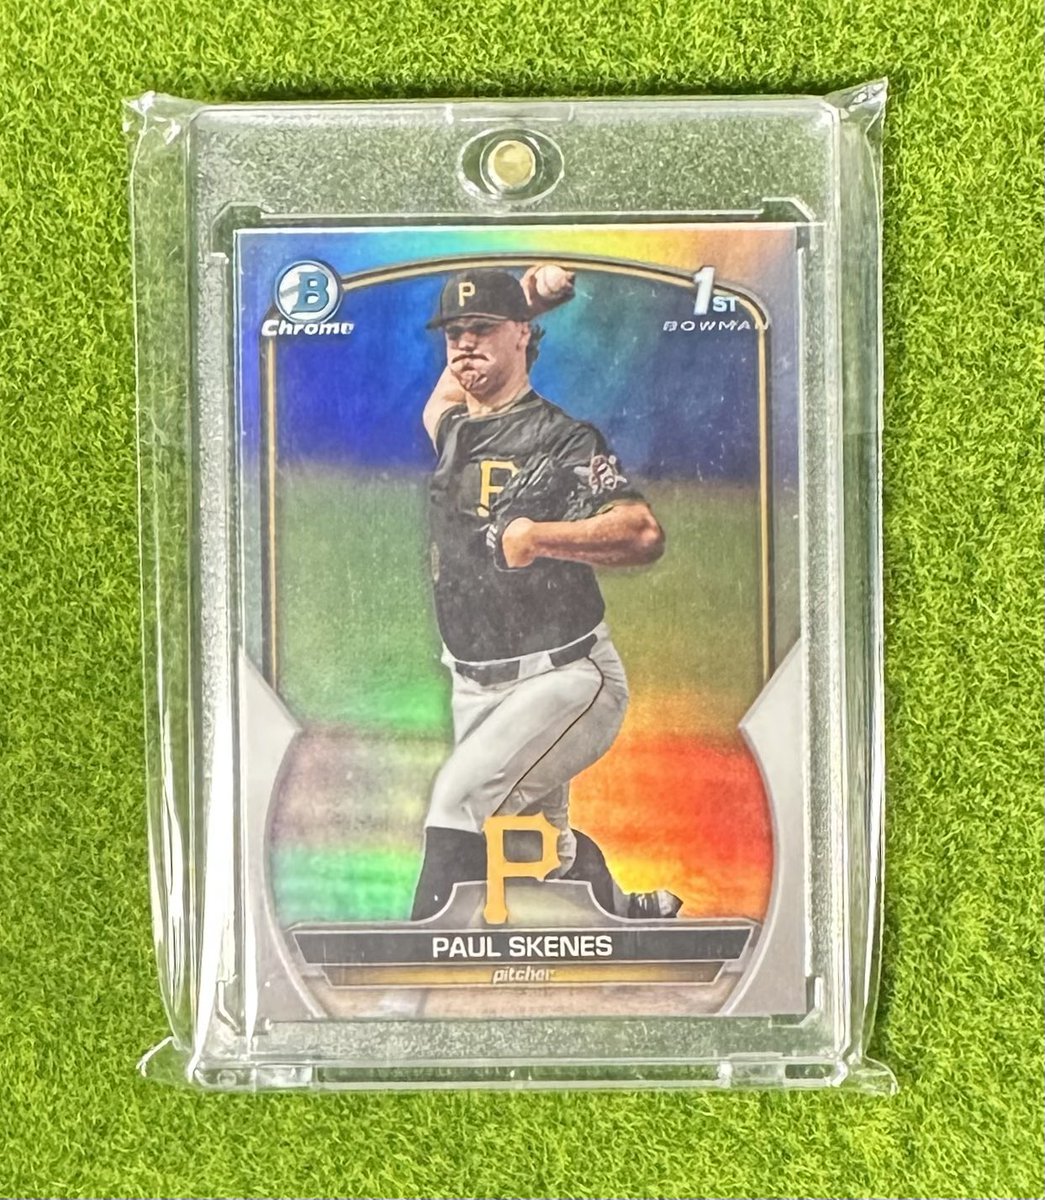 If Paul Skenes records 𝟔 𝐊 or more in his MLB Debut against the Chicago Cubs one person will win his first ever Topps 1st Refractor Card! 

𝗥𝗨𝗟𝗘𝗦: 𝗙𝗼𝗹𝗹𝗼𝘄, 𝗹𝗶𝗸𝗲, 𝗿𝗲𝘁𝘄𝗲𝗲𝘁

Winner will be selected following the game #LetsGoBucs